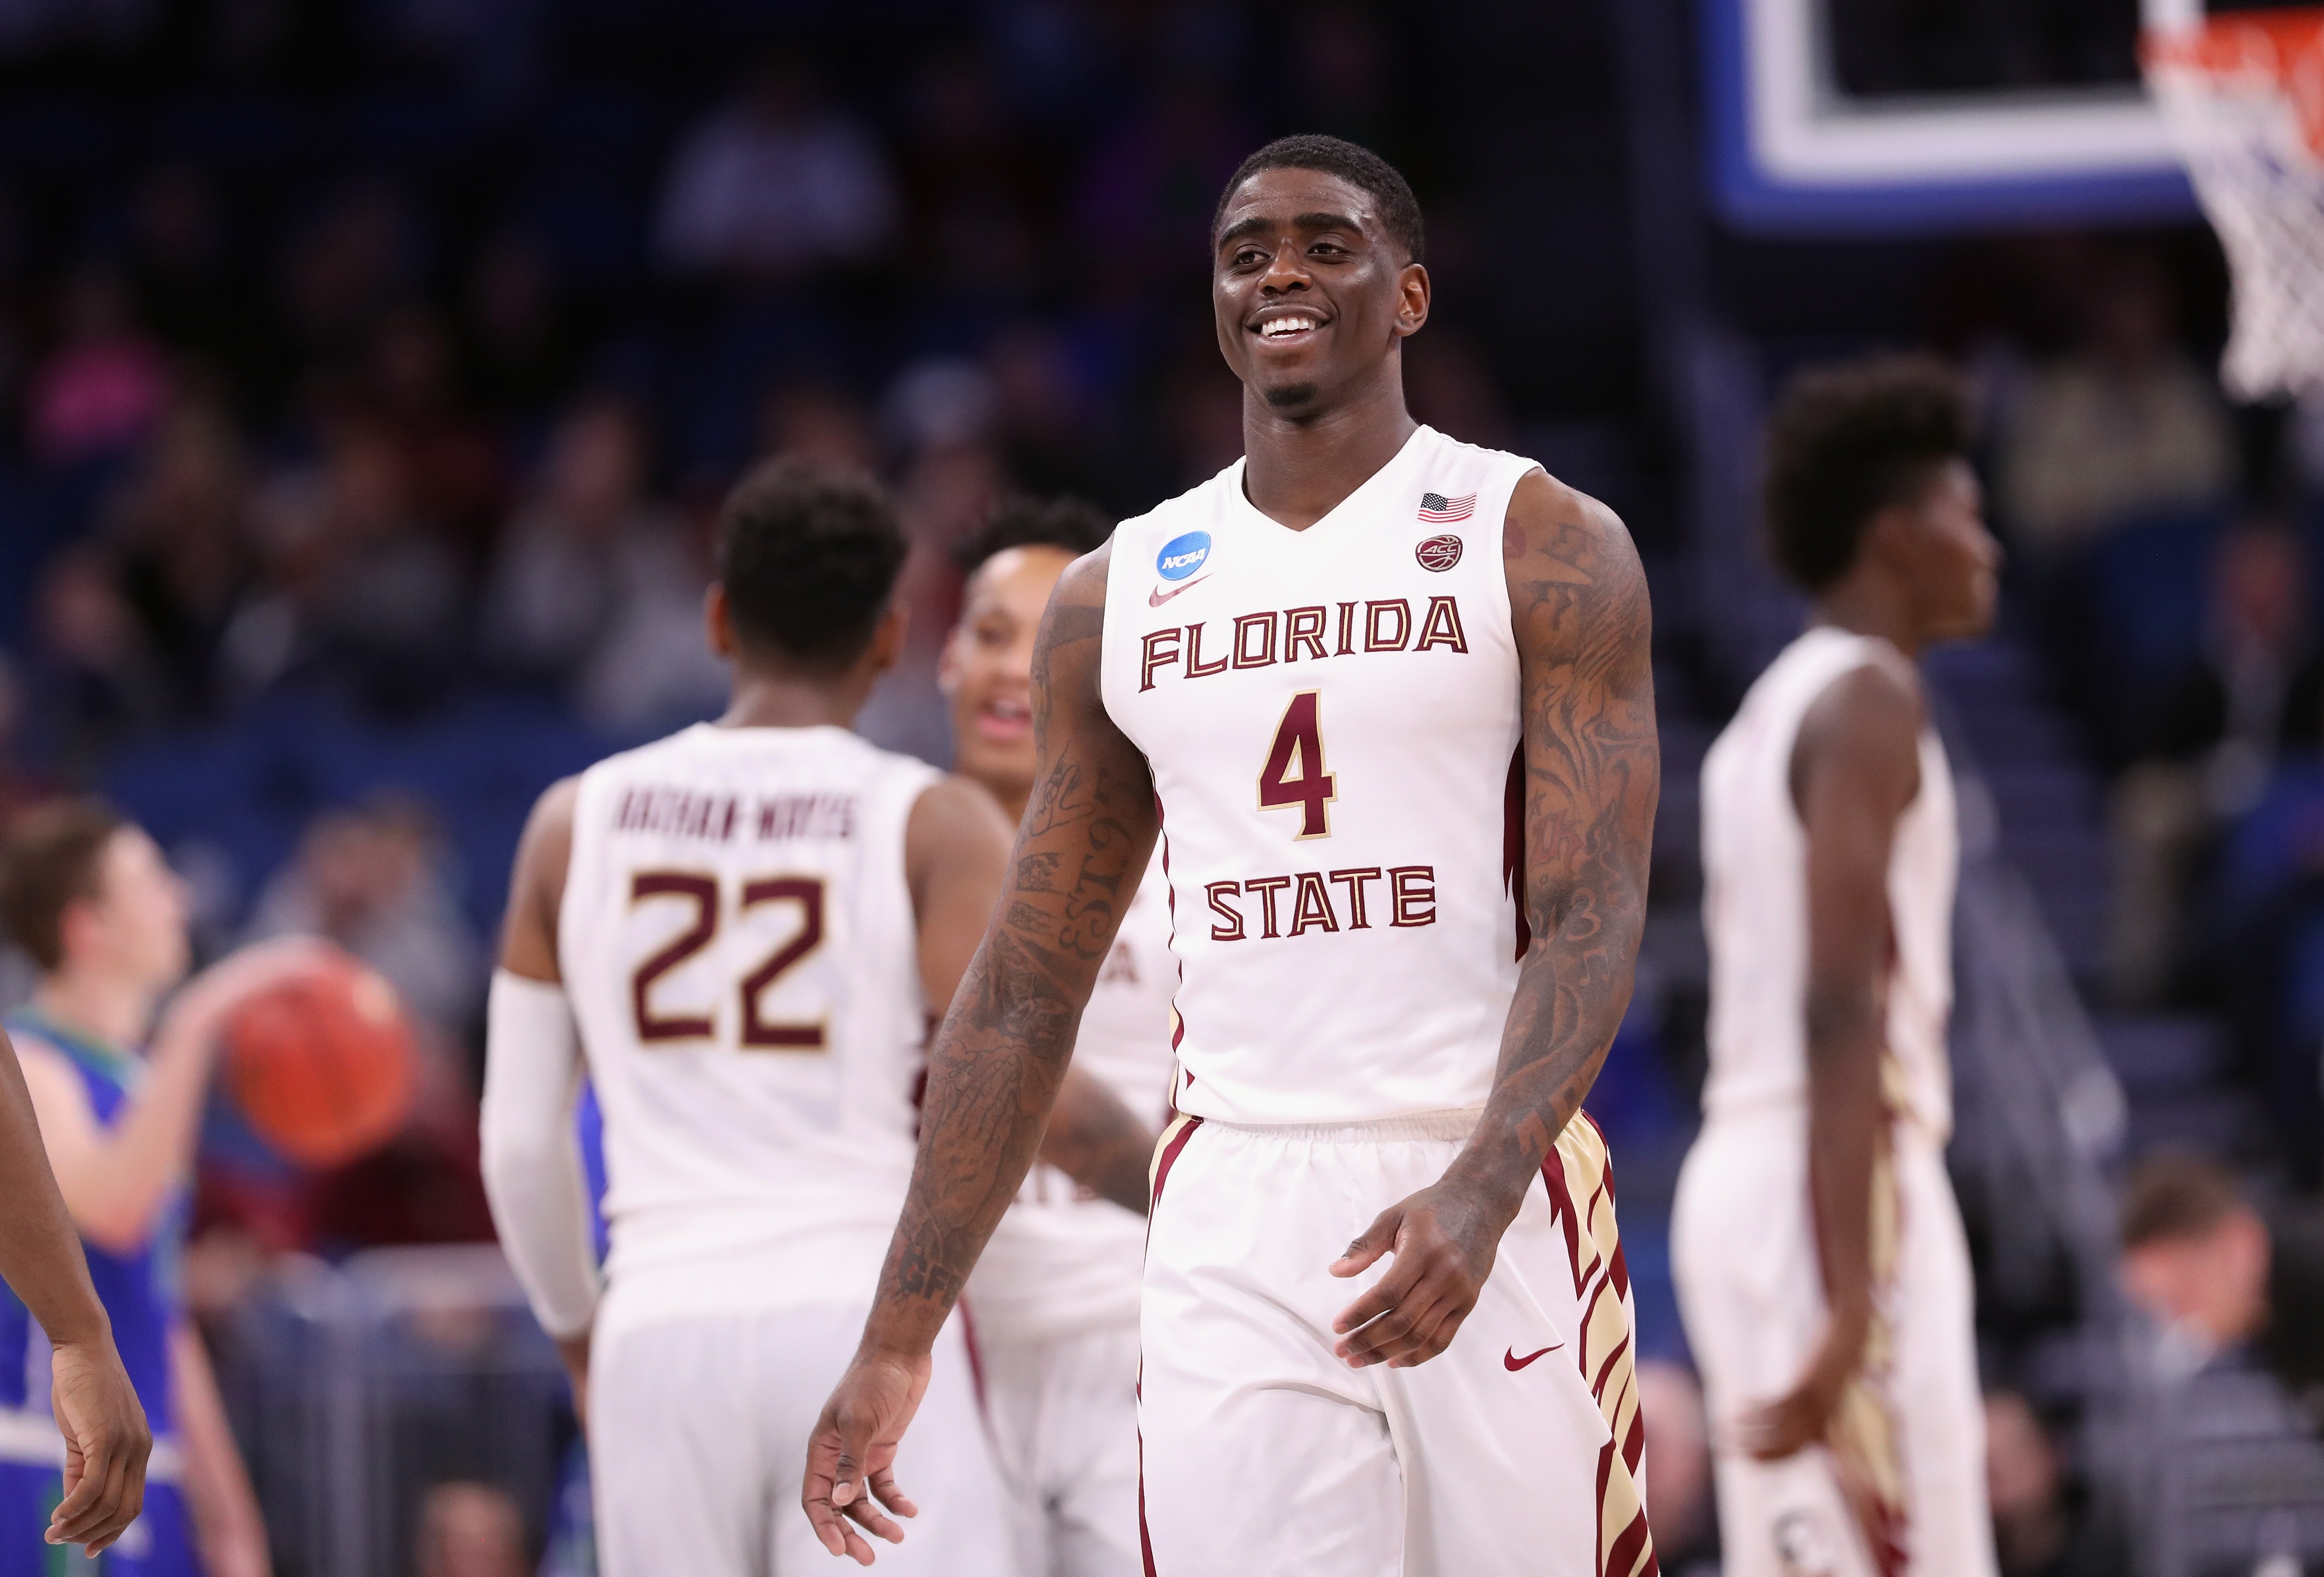 After his freshman season playing for FSU basketball, some experts thought ...